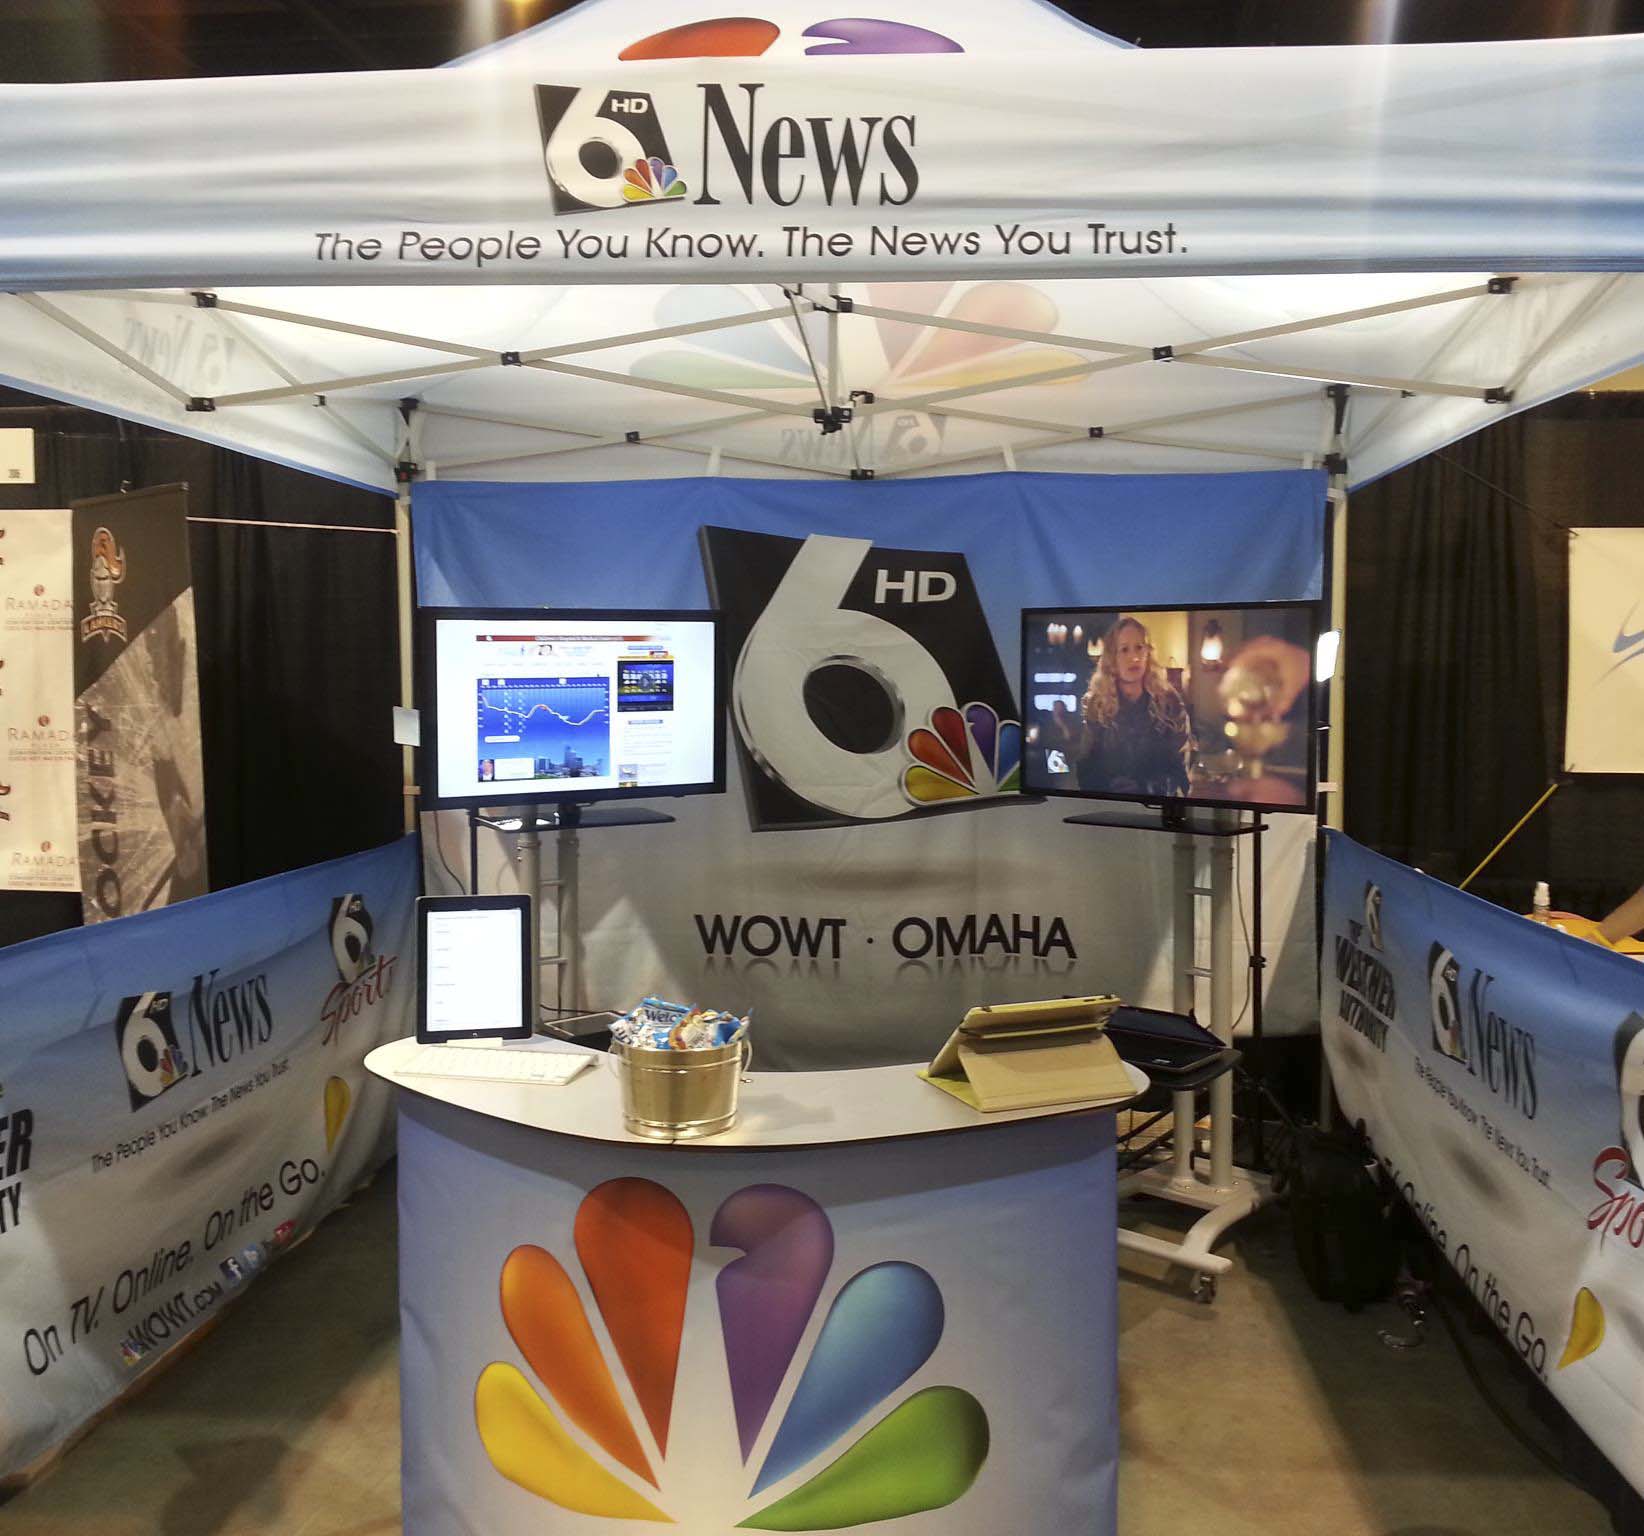 WOWT news in Omaha uses branded materials for a community event